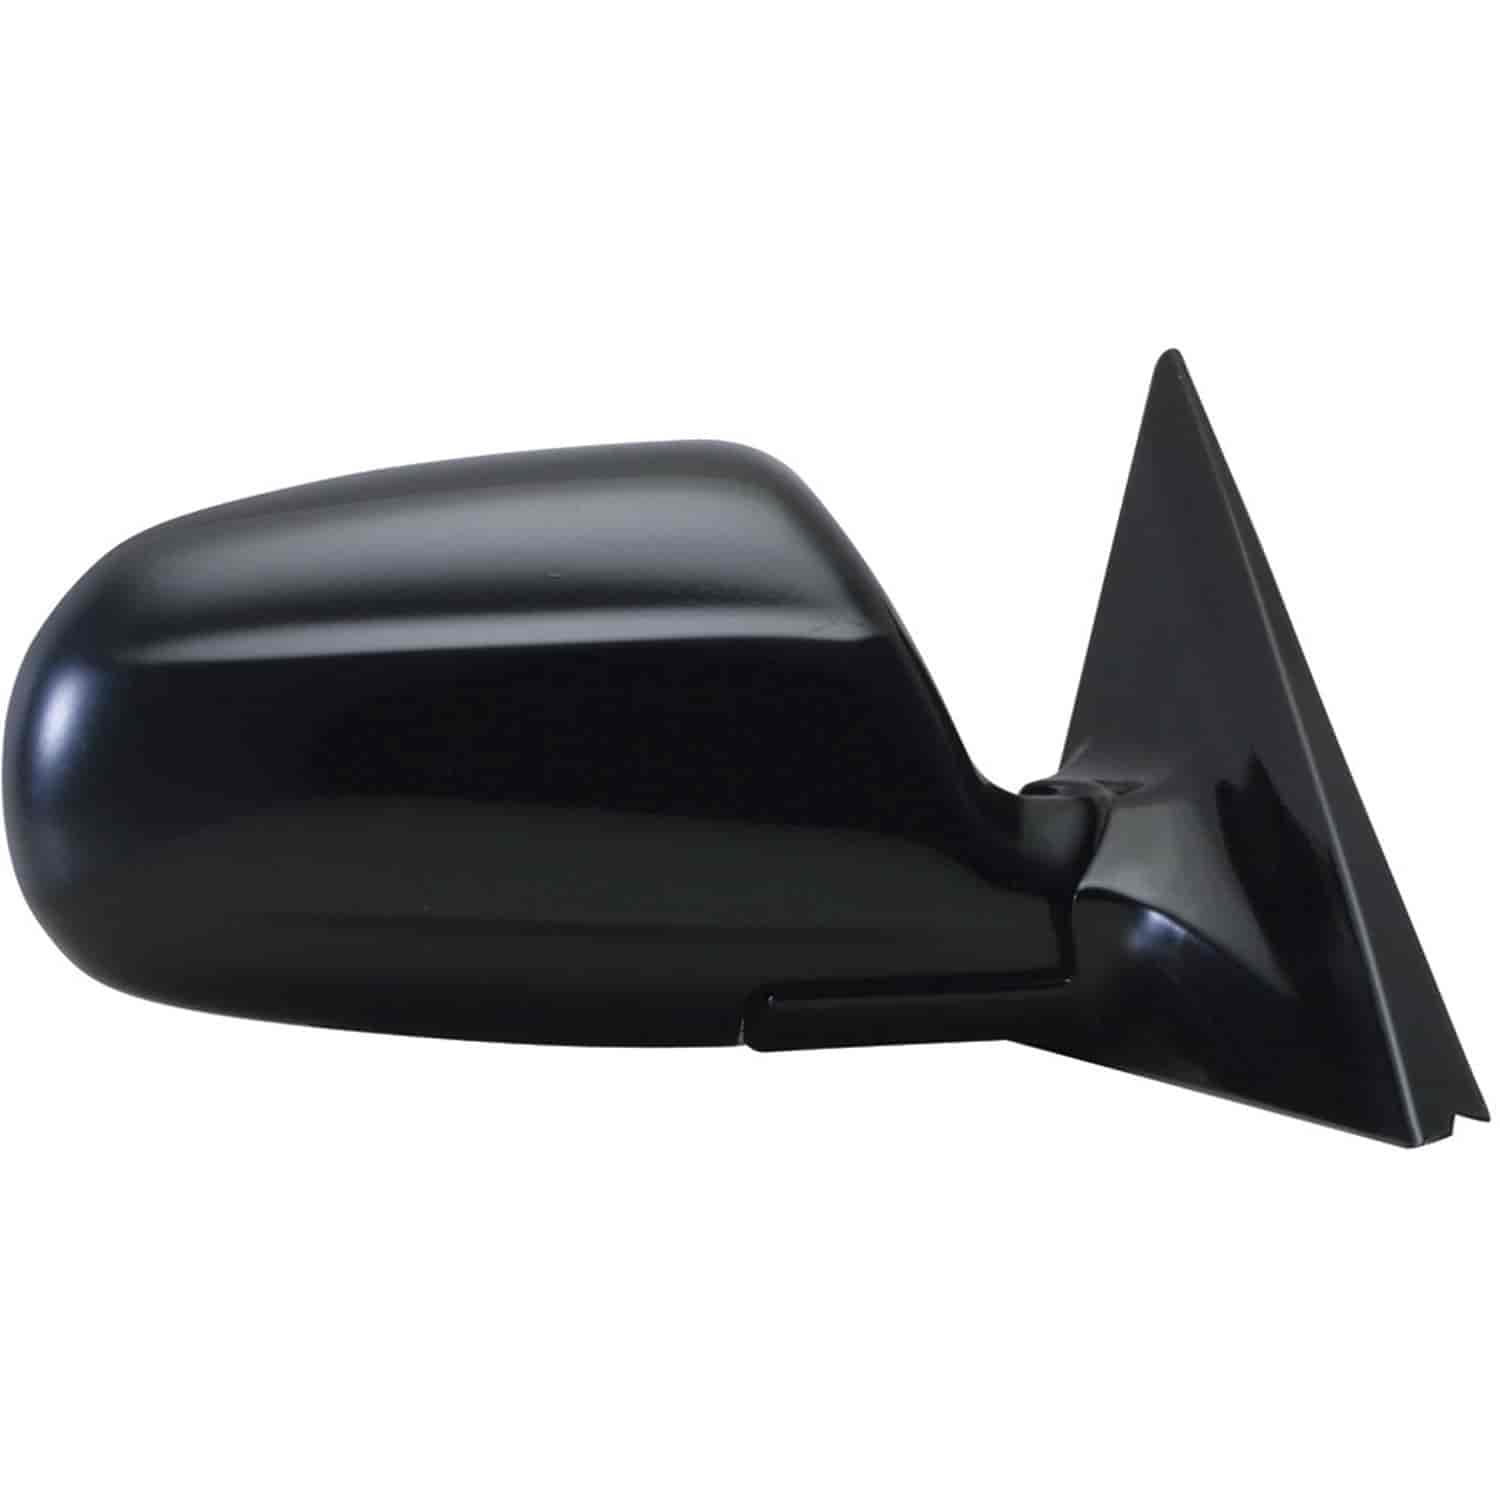 OEM Style Replacement mirror for 94-01 ACURA Integra GS LS GS-R SE type R passenger side mirror test